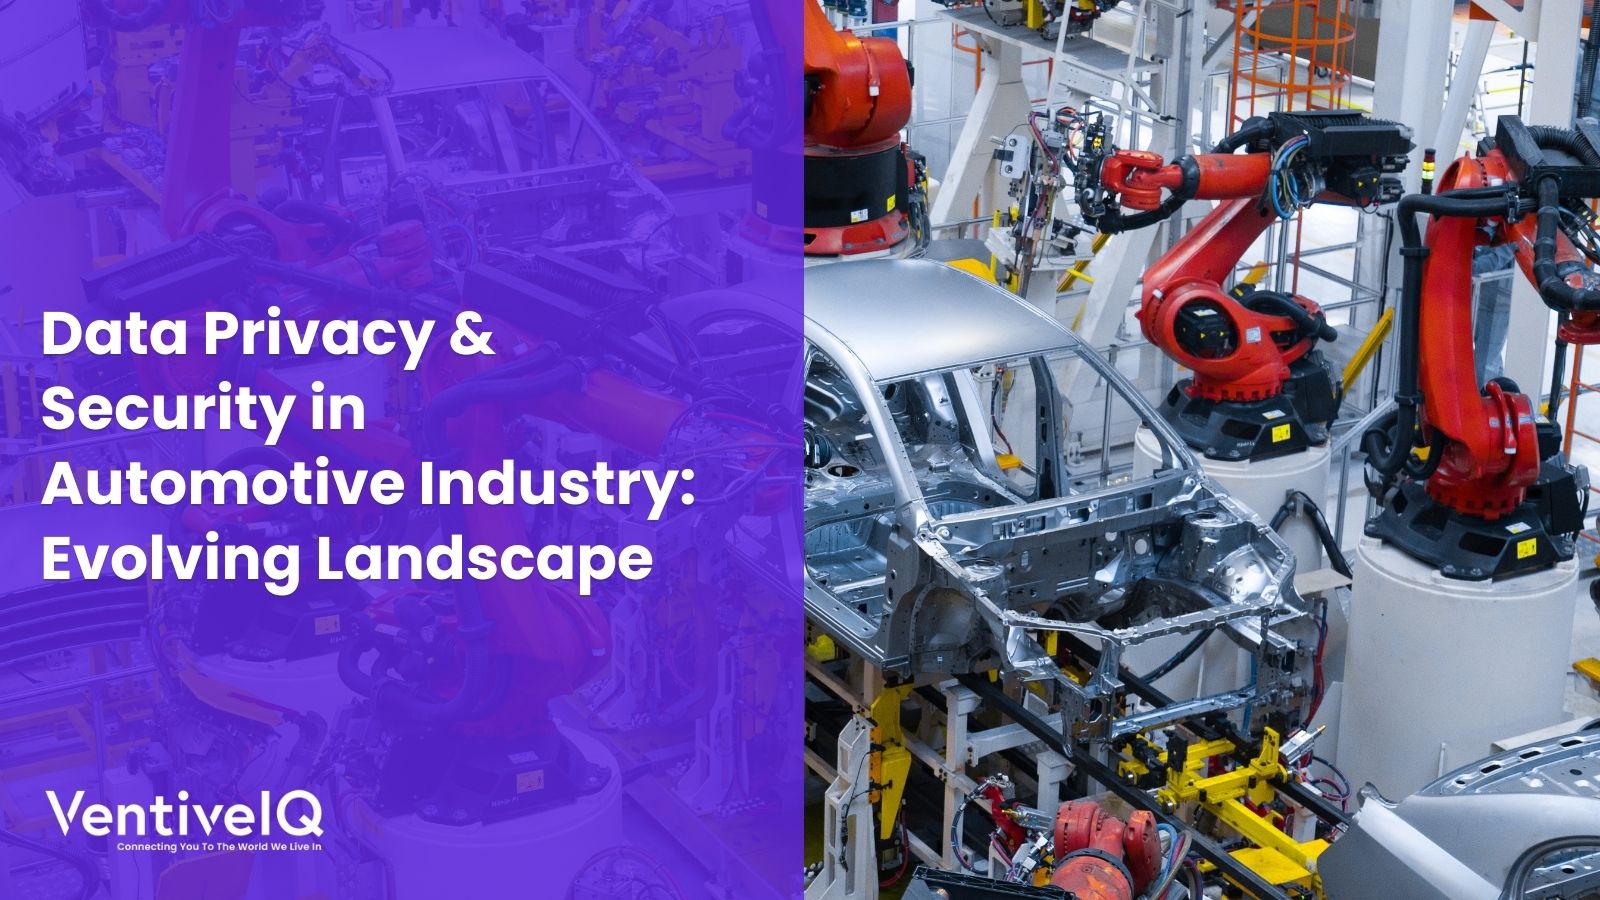 Data Privacy & Security in Automotive Industry: Evolving Landscape